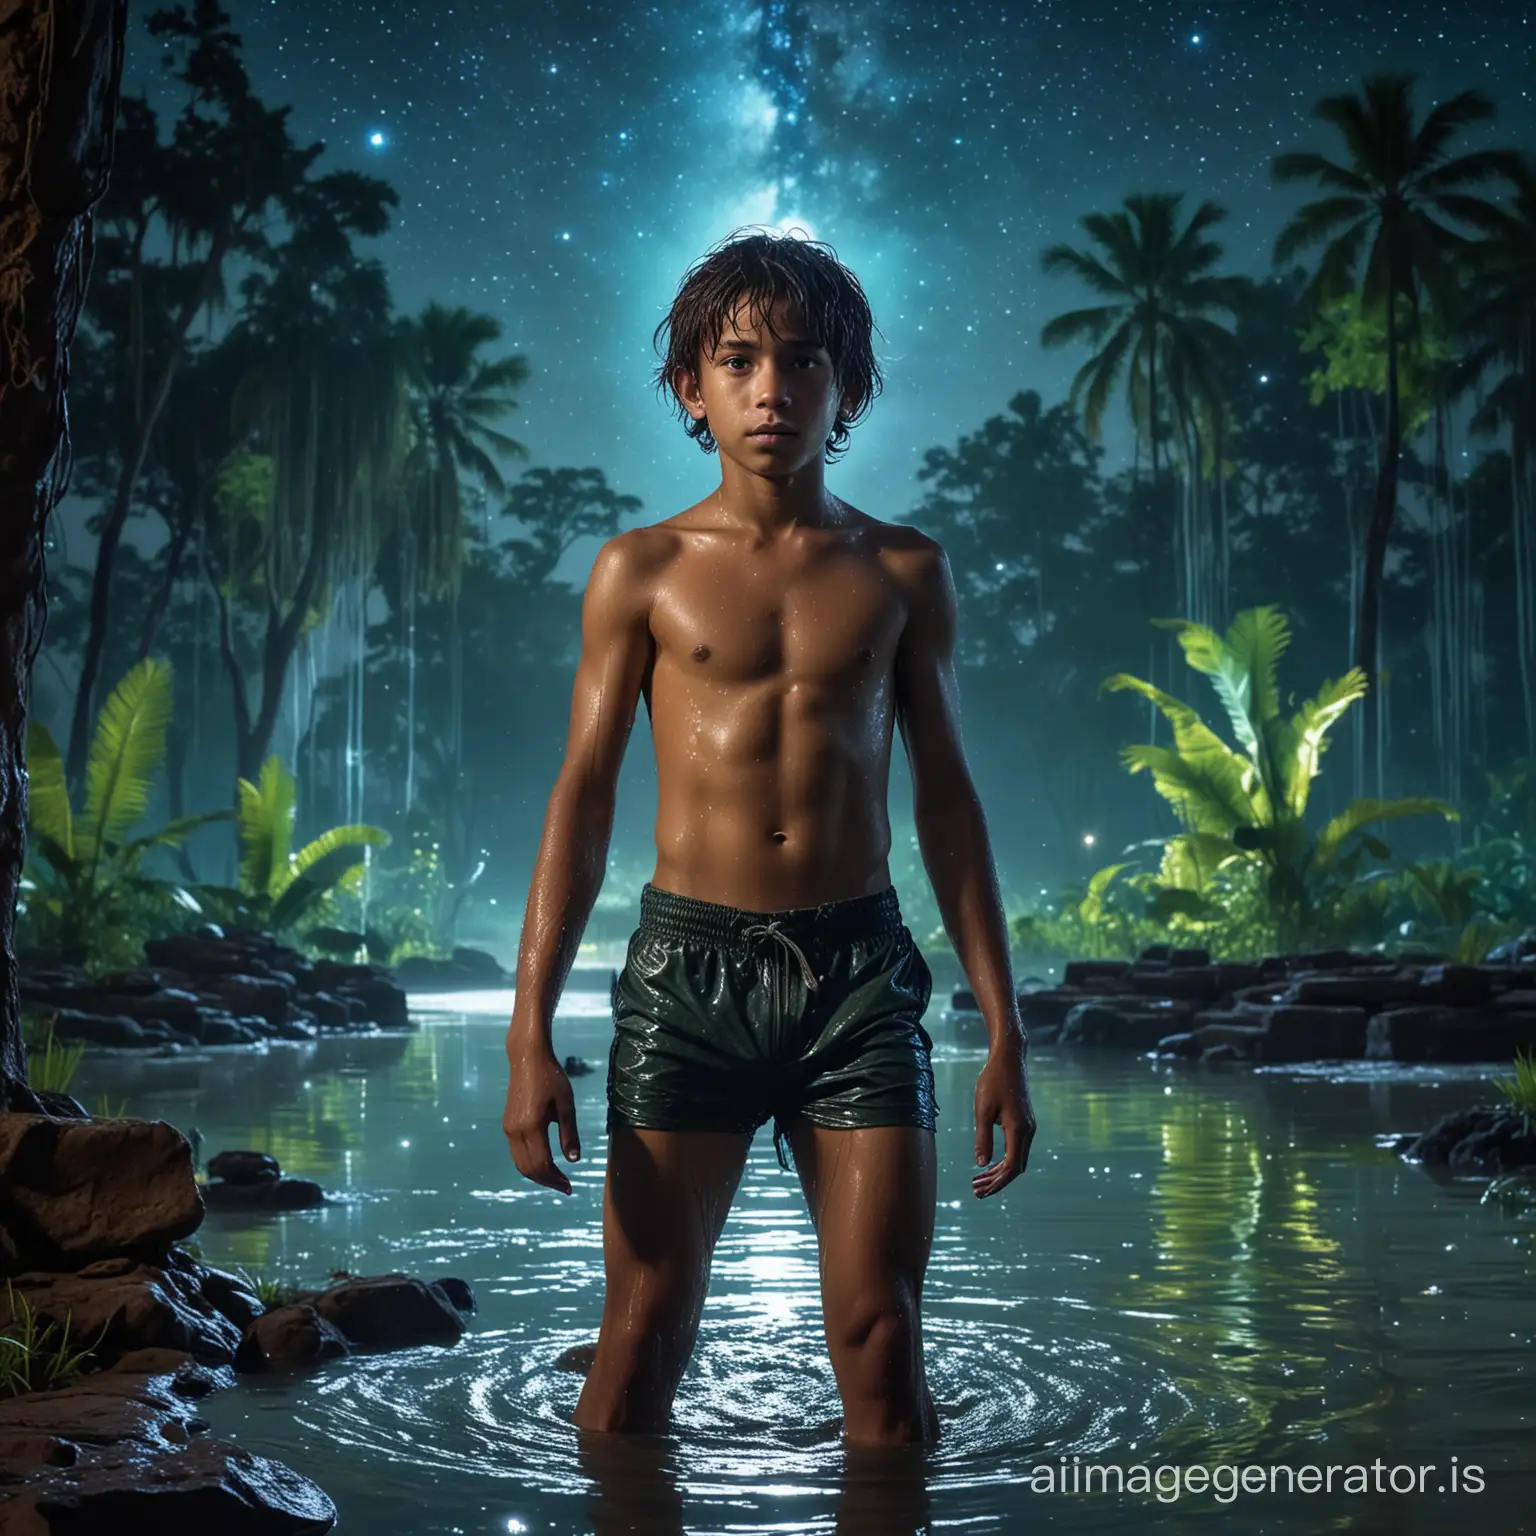 A sexy shirtless muscular sweaty wet Mowgli. The boy must be very athletic and muscled. His feet on the water of an oasis in the ruins of an cambodian temple in a jungle. At night. With blue and green neon colors ambient. The sky is full of stars with a huge galaxy.